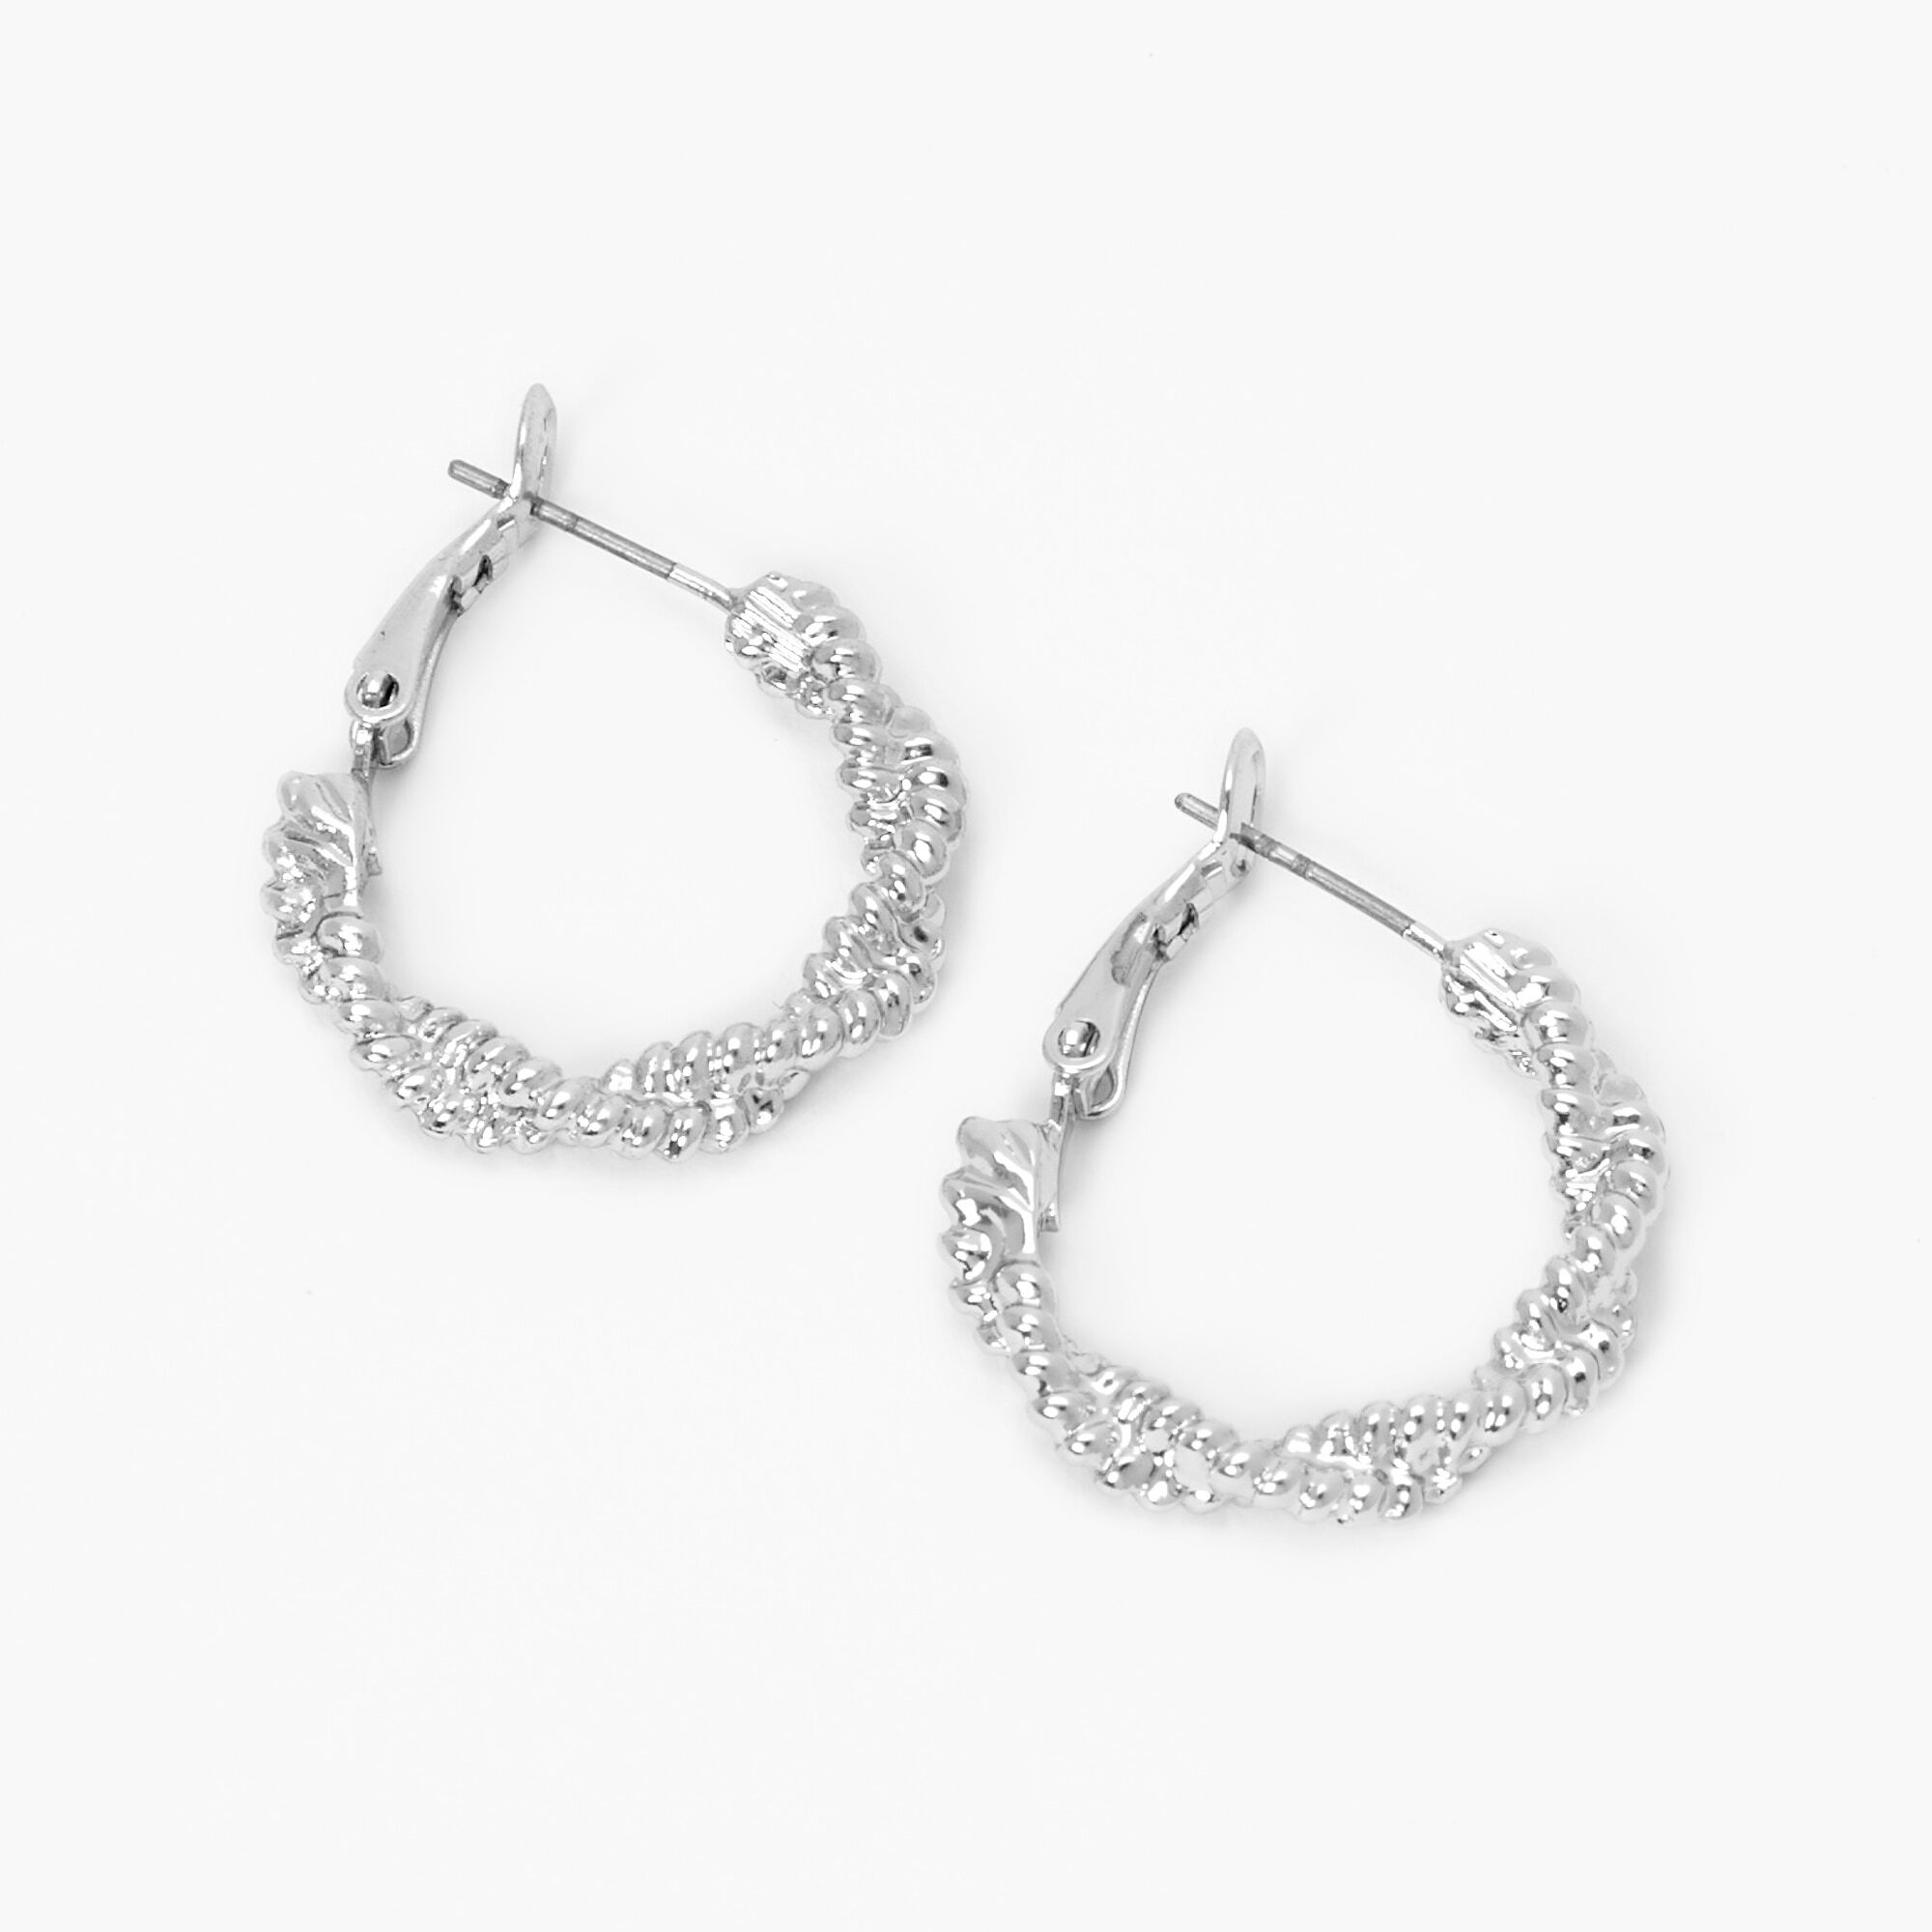 View Claires Tone Twisted Braid Hoop Earrings Silver information